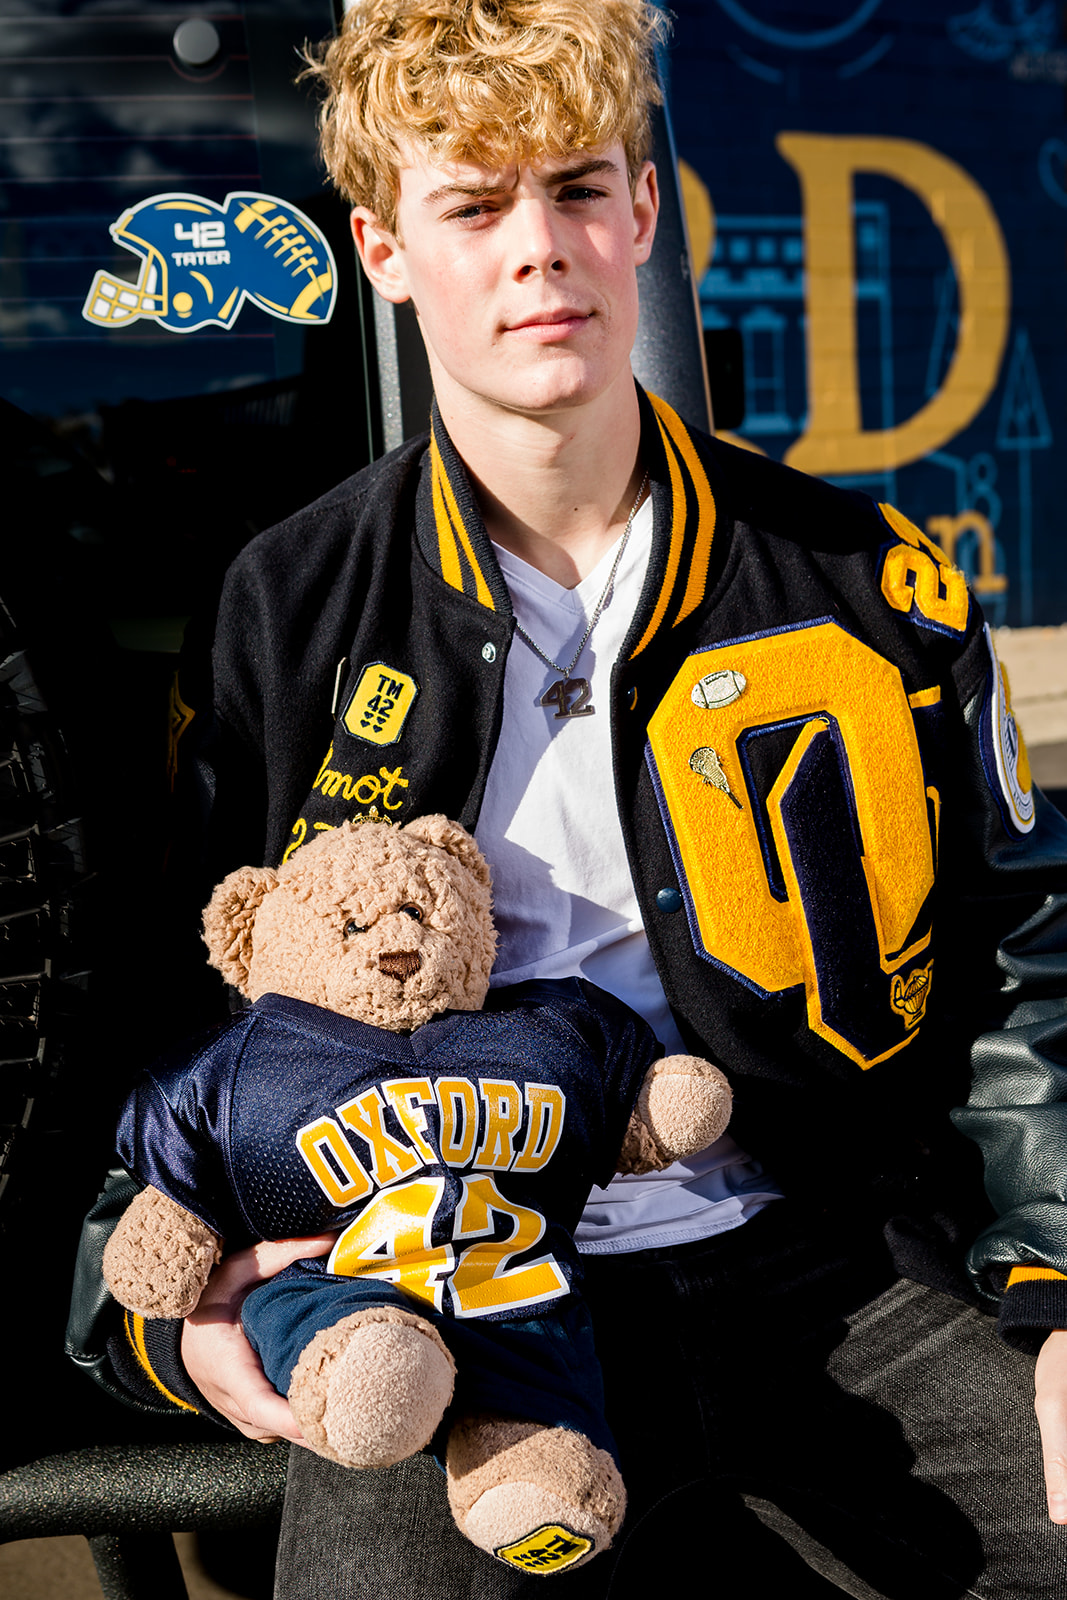 Logan with his bear in commemoration of his friend Tate